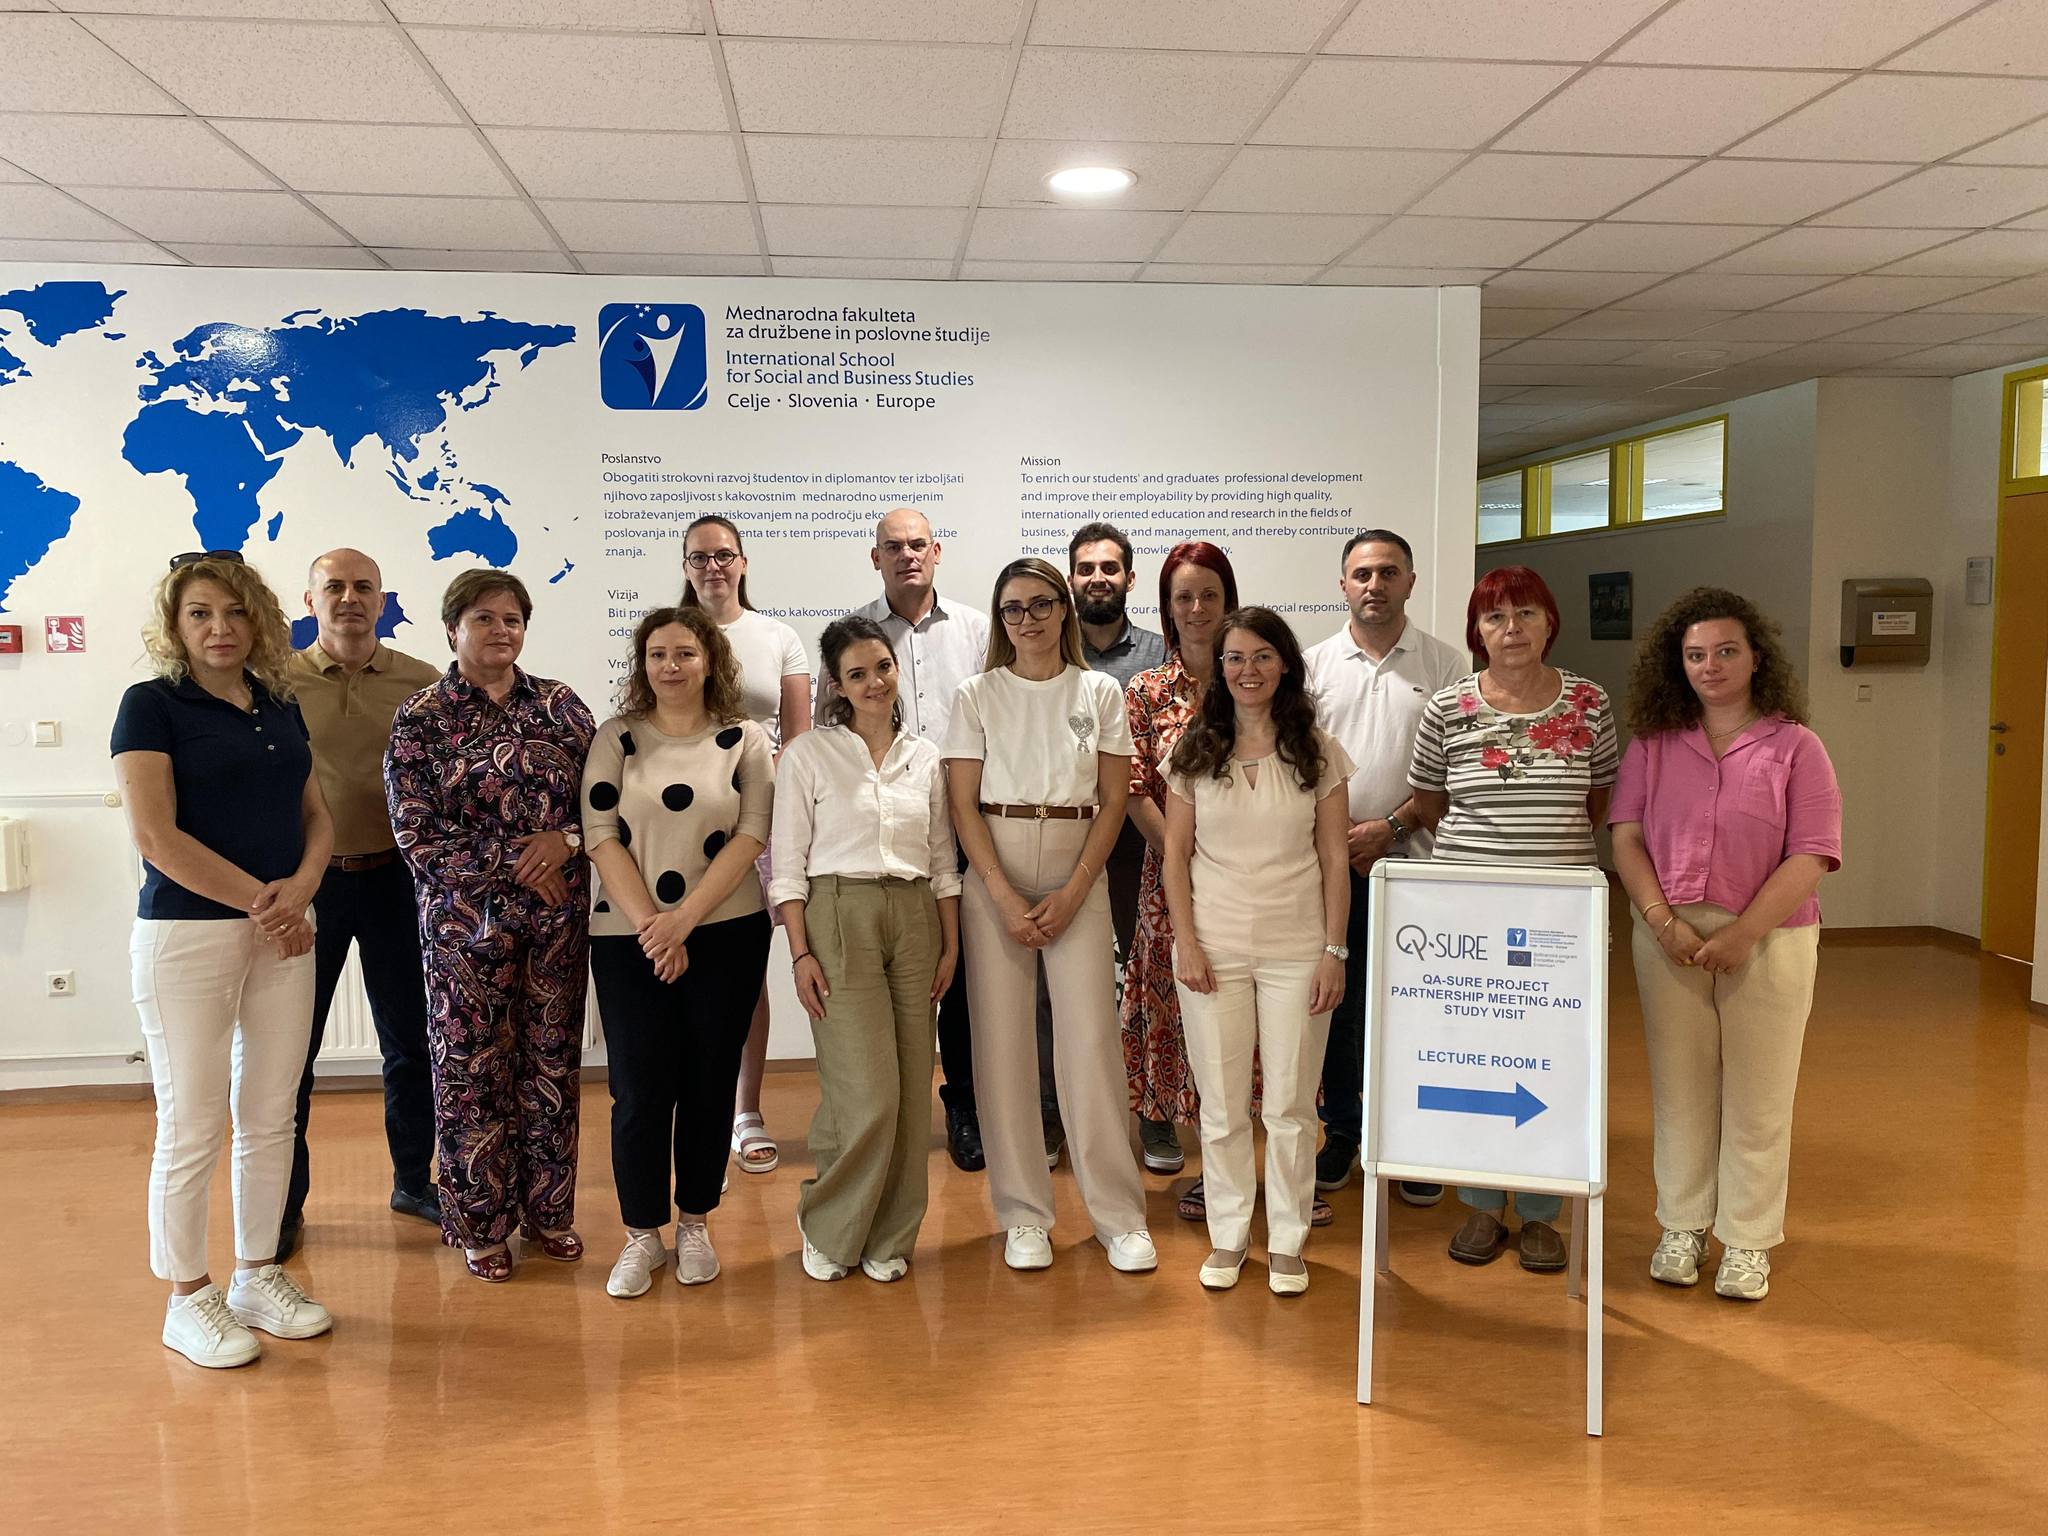 The QA-Sure Consortium Has Completed The Study Visit At The International Social Sciences Business School (ISSBS) In Celje And The National Accreditation Agency Of The Republic Of Slovenia (NAKVIS) In Ljubljana.